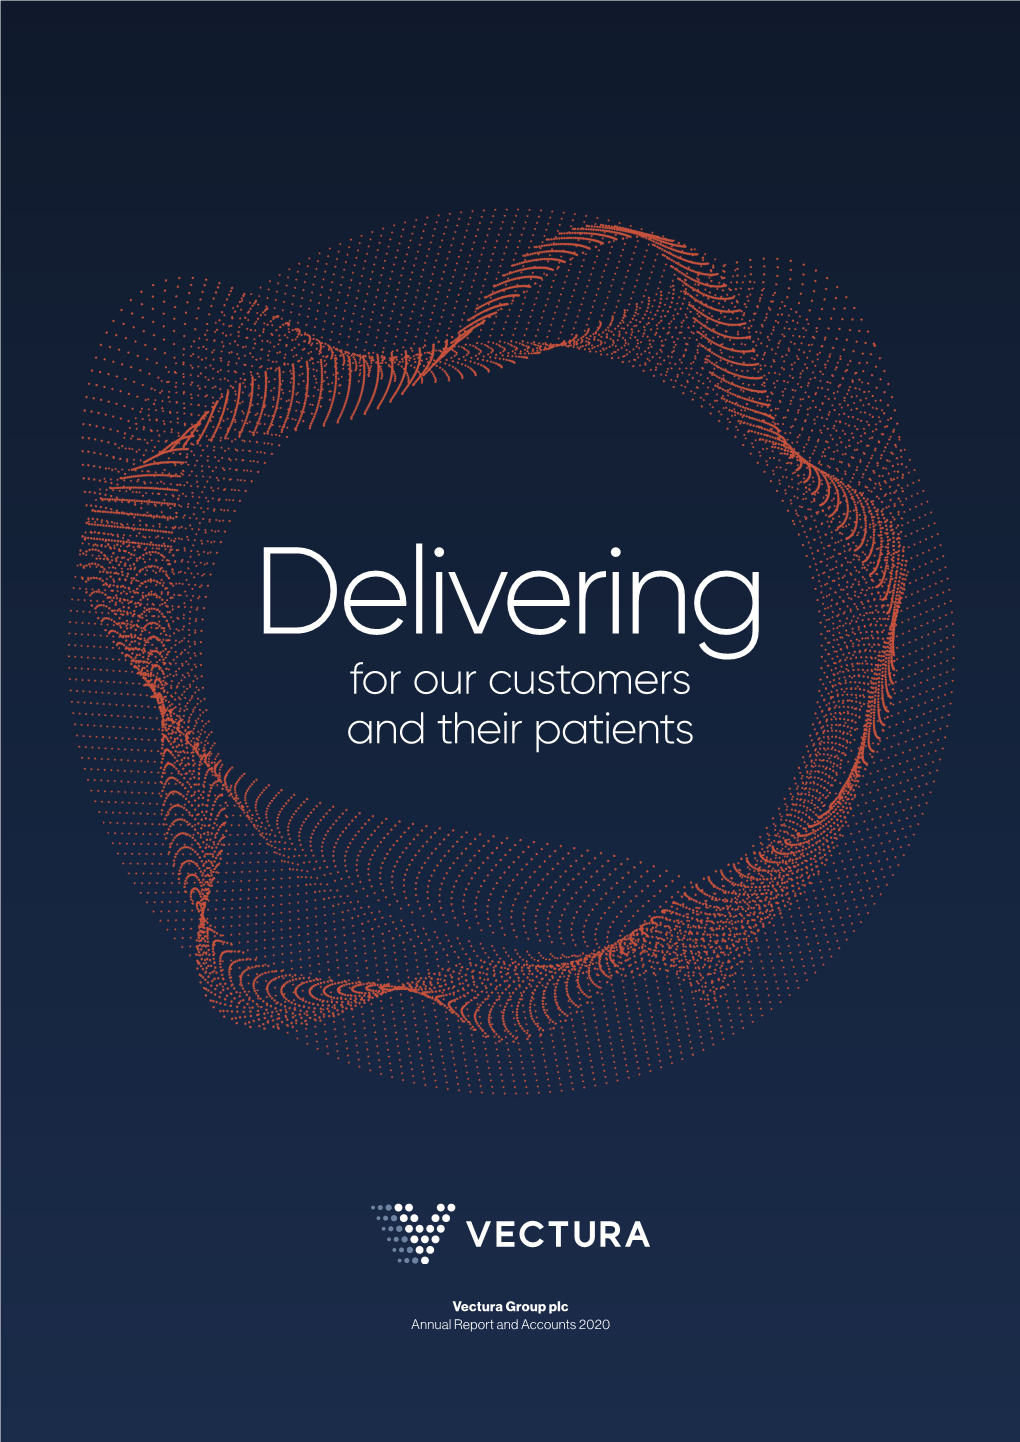 Vectura Group Plc Annual Report and Accounts 2020 Delivering for Our Customers and Their Patients